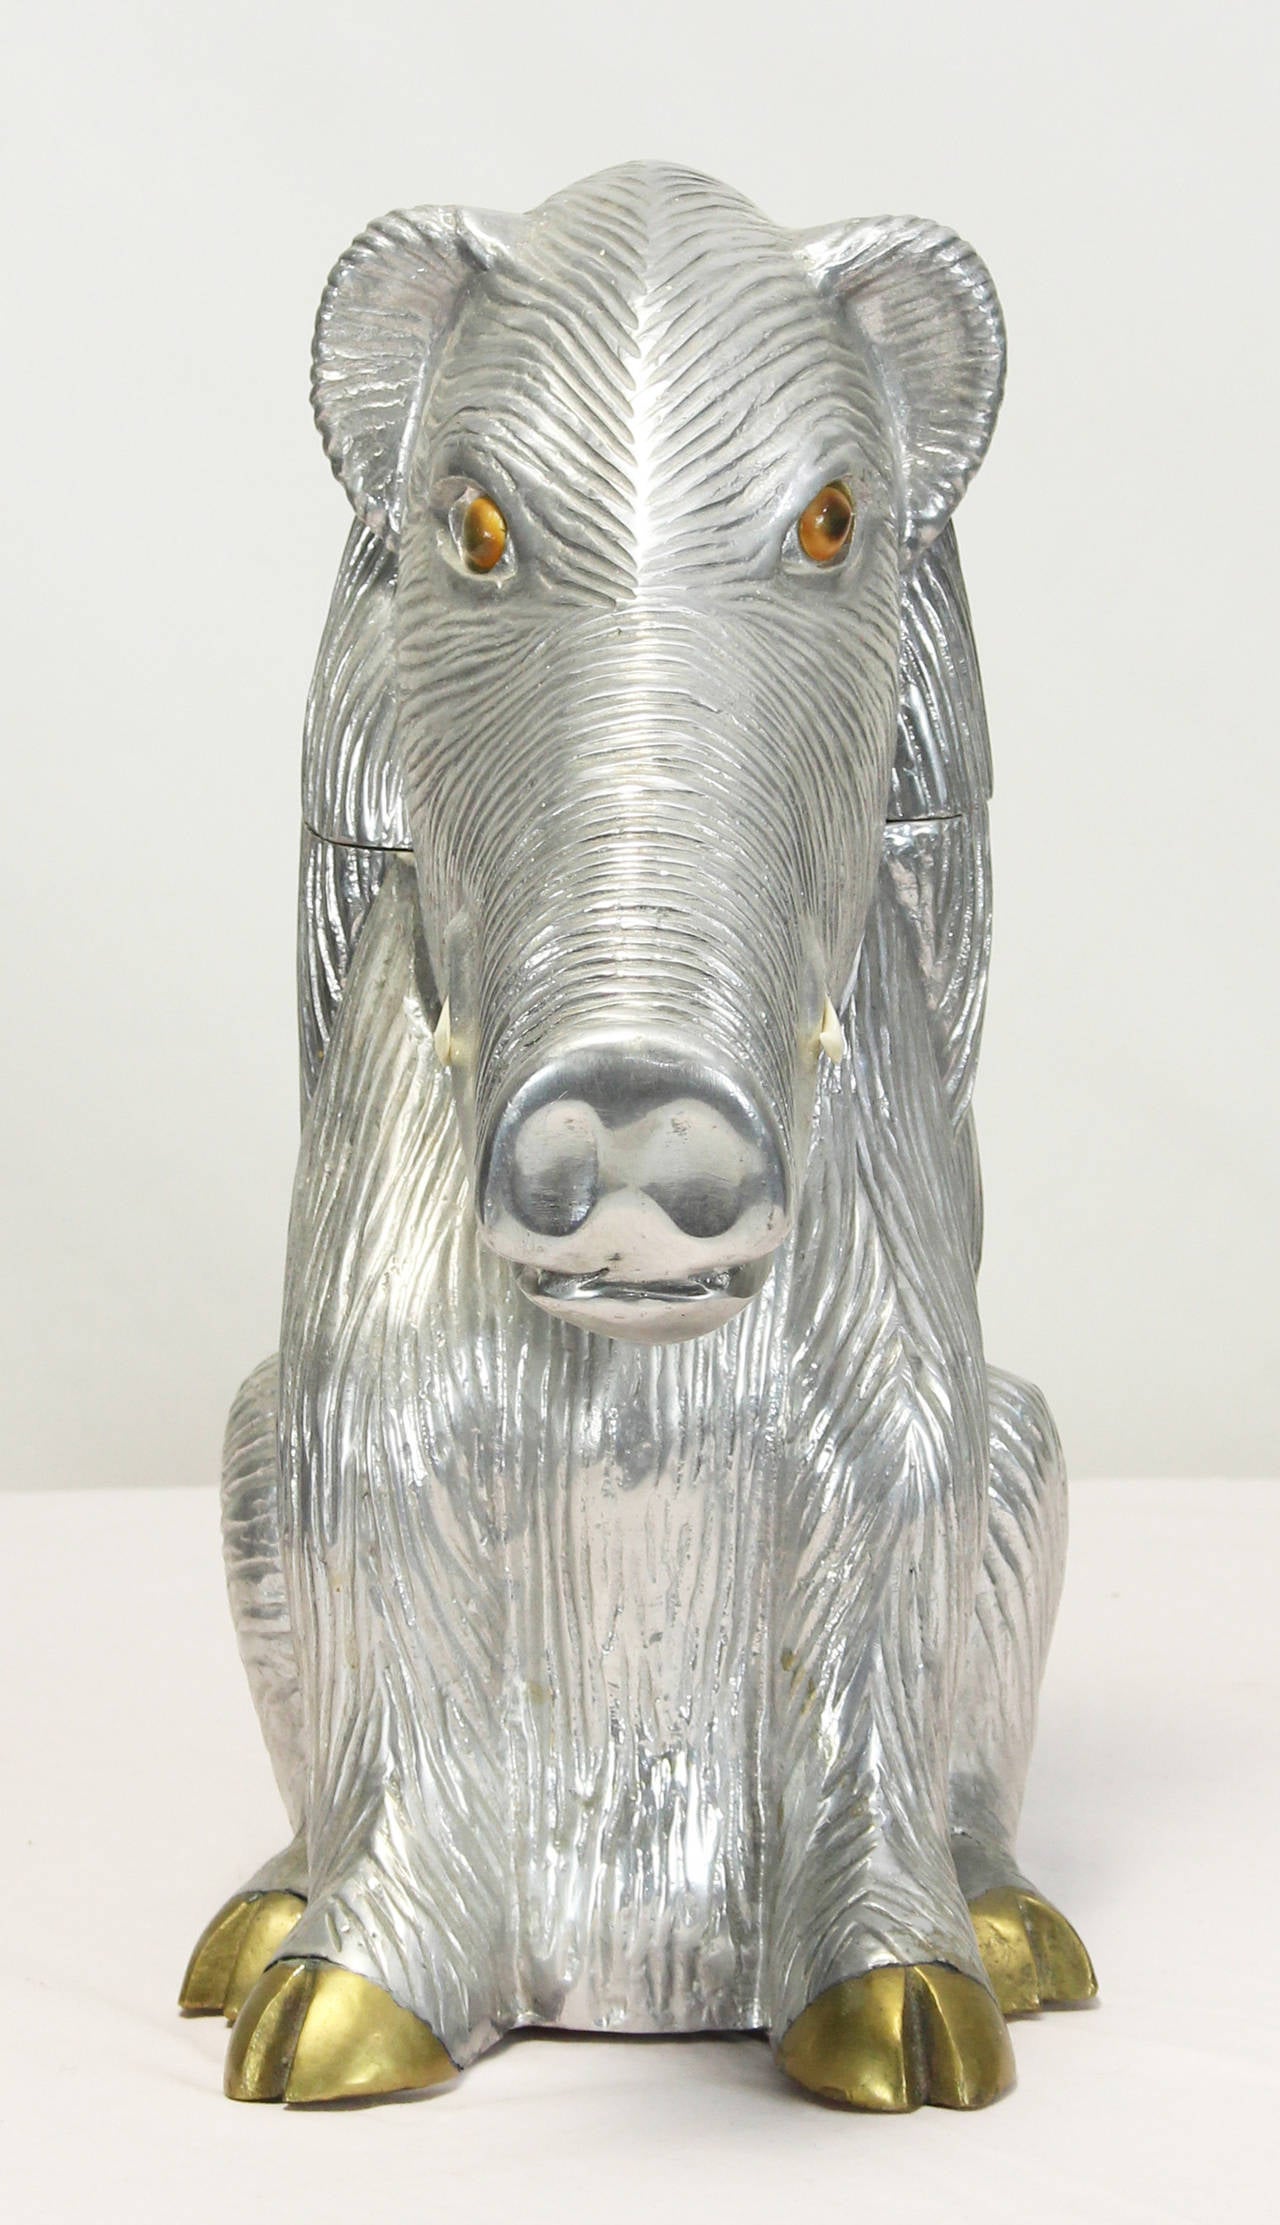 A whimsical and very charming warthog wine cooler in cast aluminum with glass eyes, bakelite tusks and brass feet.